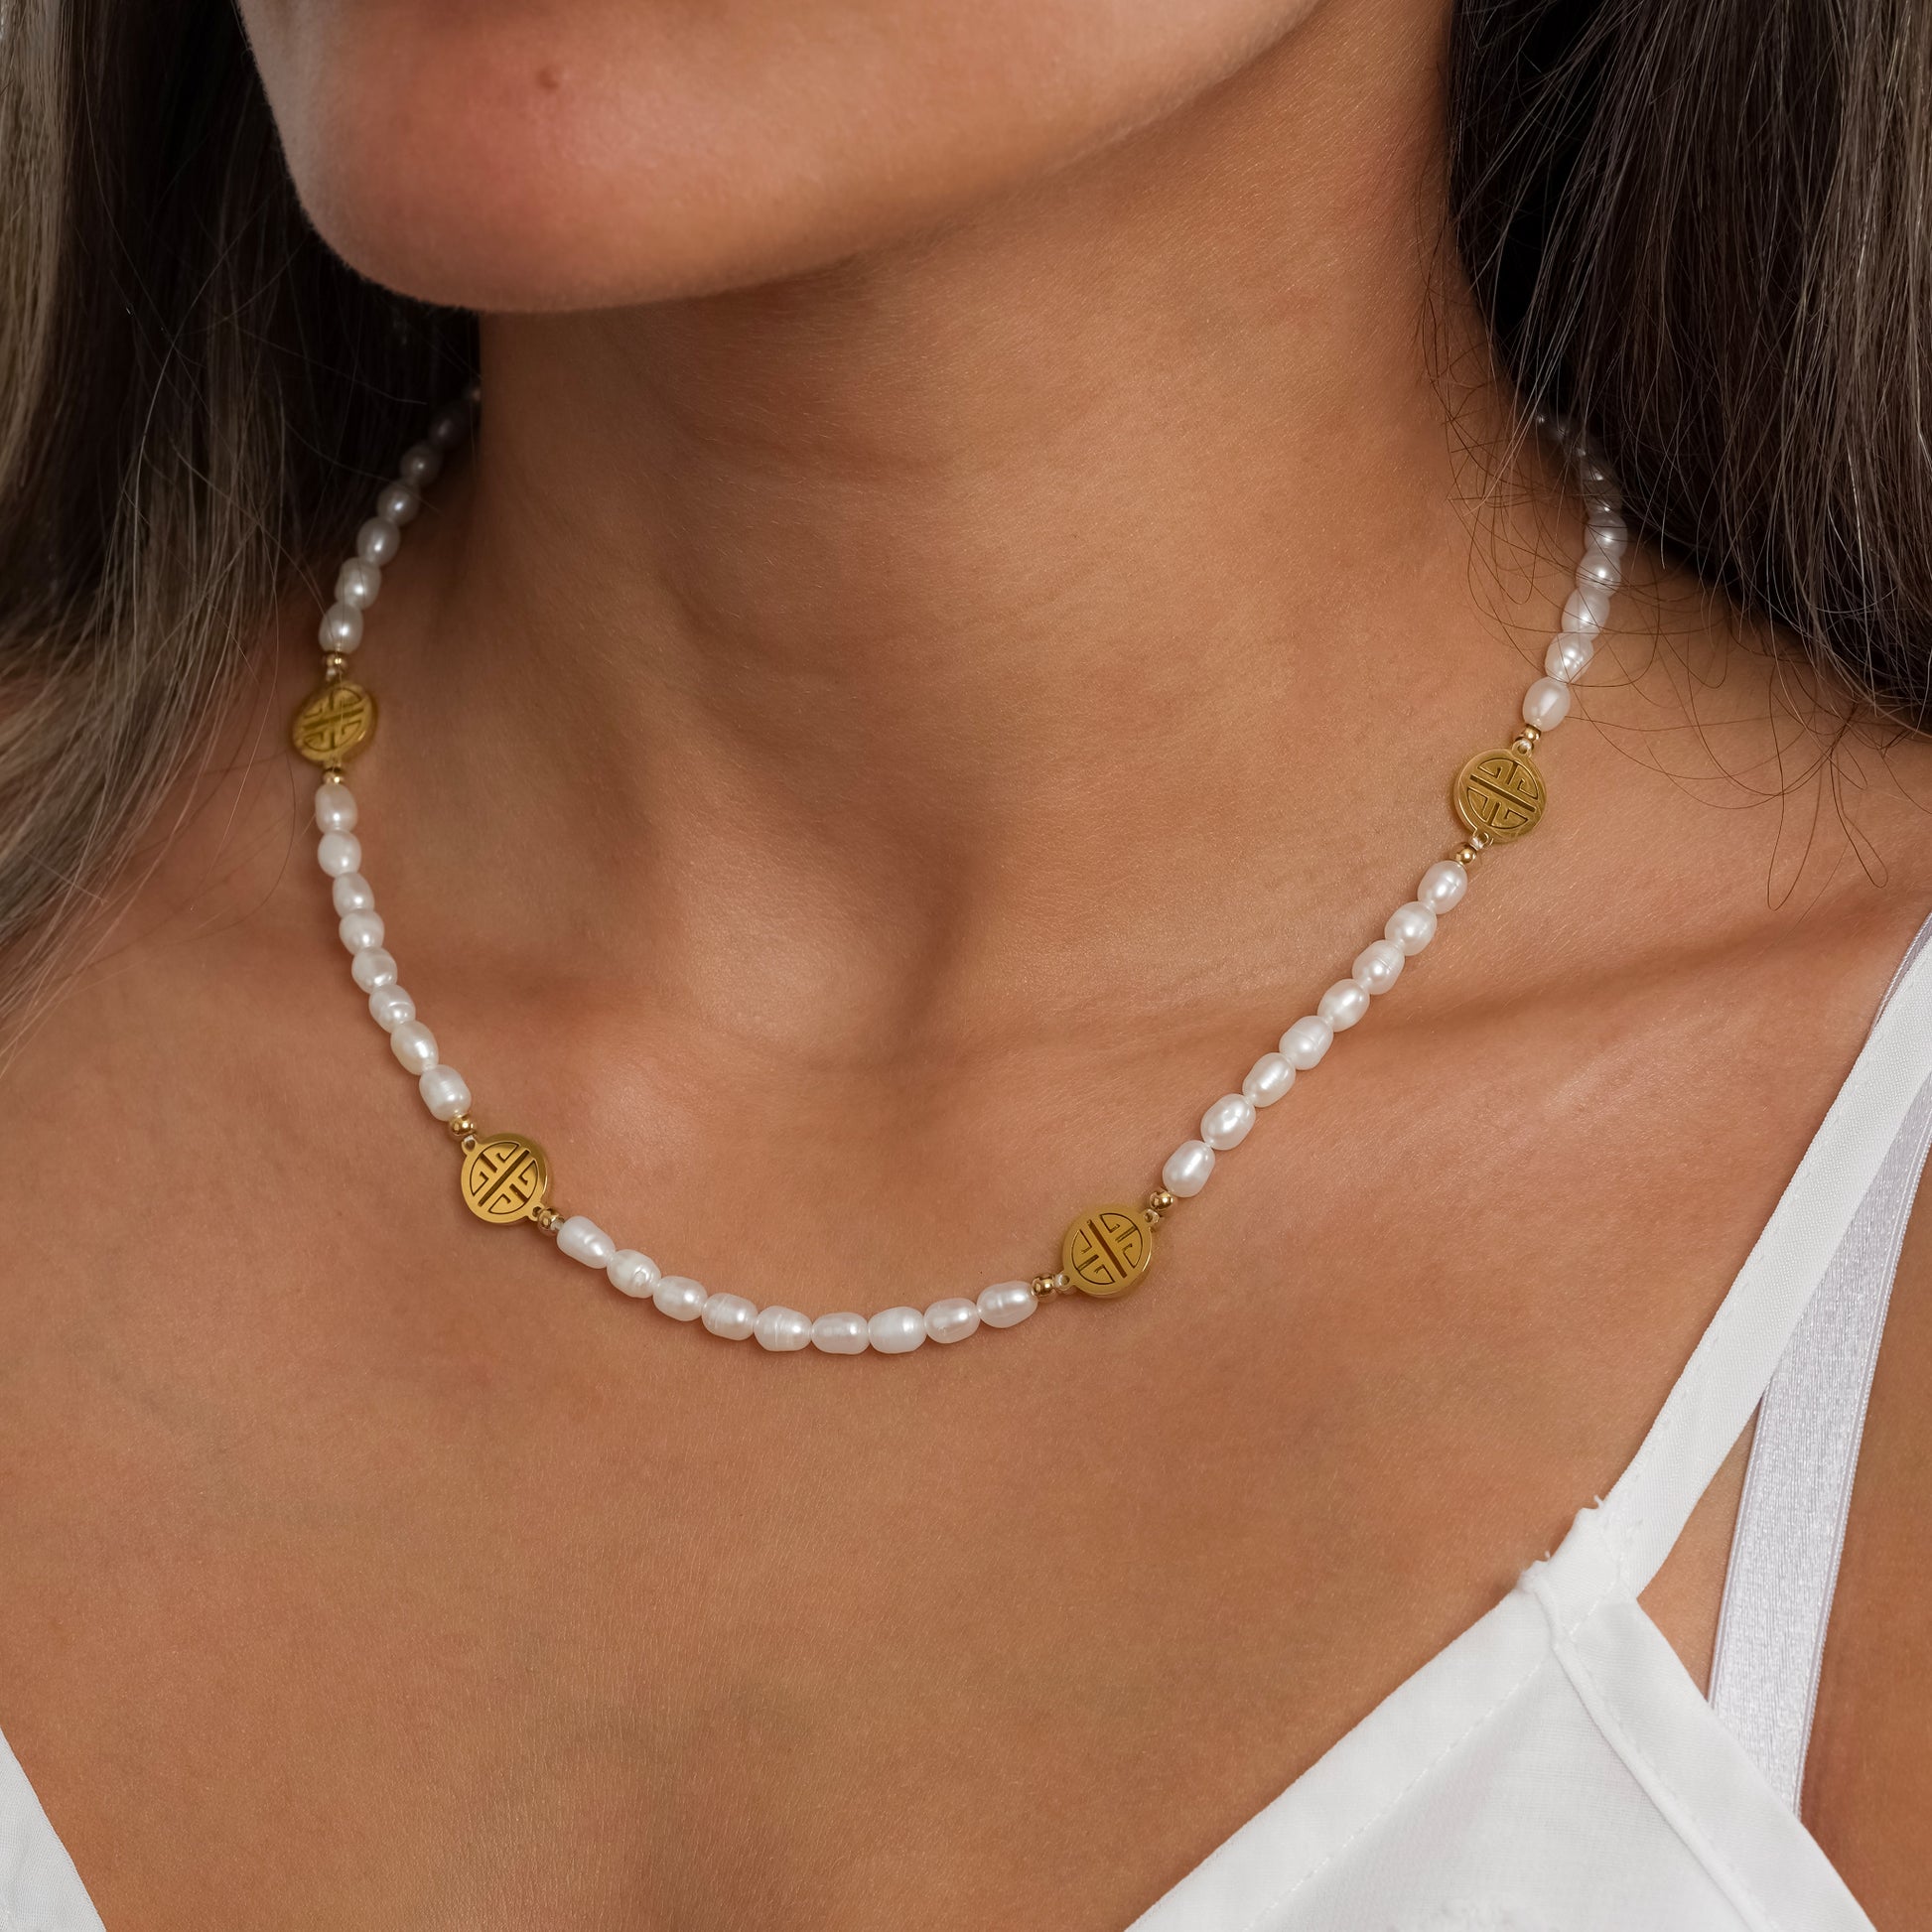 A model wearing Lucky Pendant Pearl Necklace